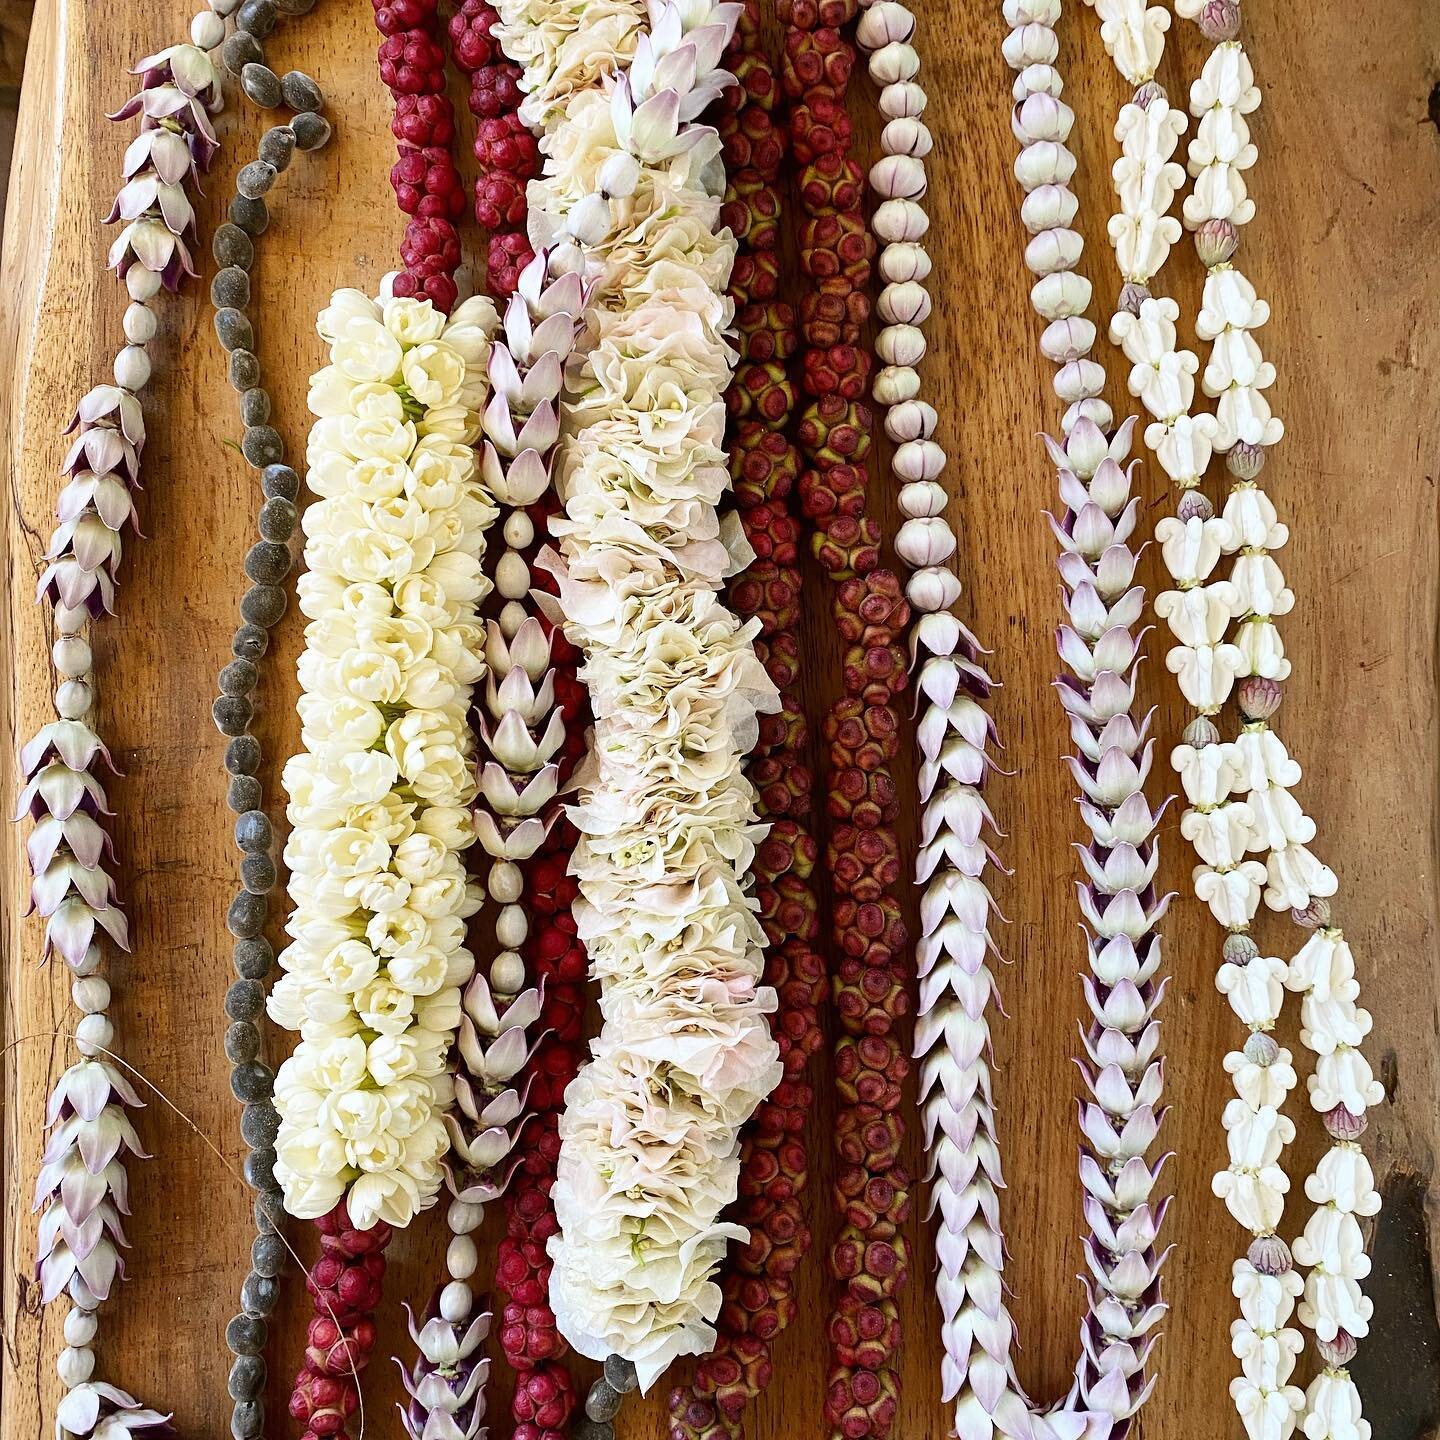 It is a power wedding week! One tract mind, one strand at a time. Lei lei lei!